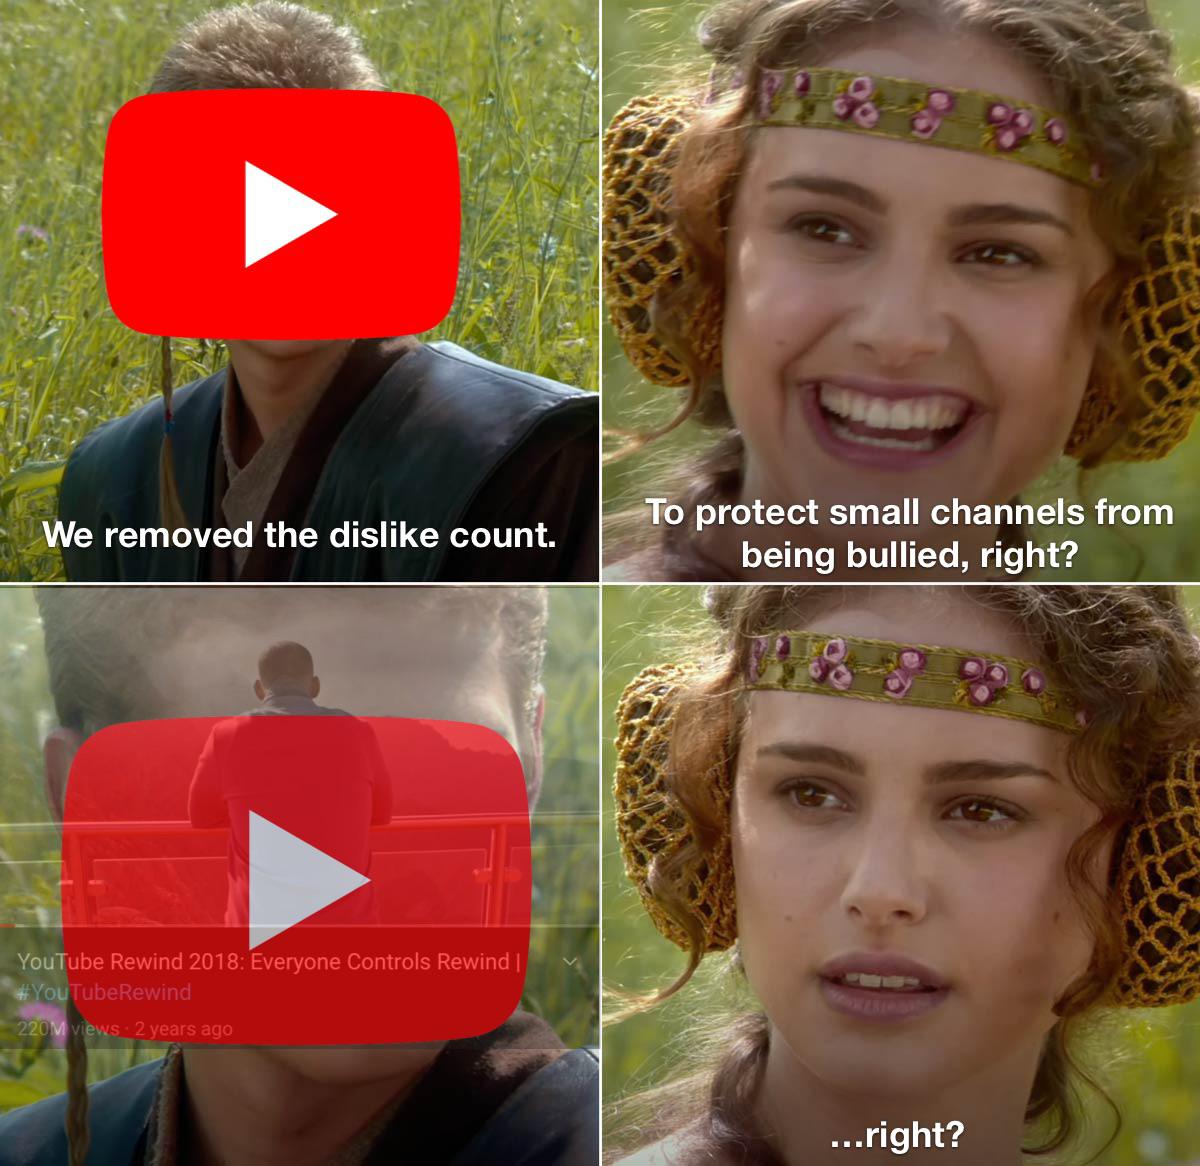 gaming memes  - padme amidala - We removed the dis count. To protect small channels from being bullied, right? YouTube Rewind 2018 Everyone Controls Rewind | YouTube Rewind 220M views 2 years ago ...right?